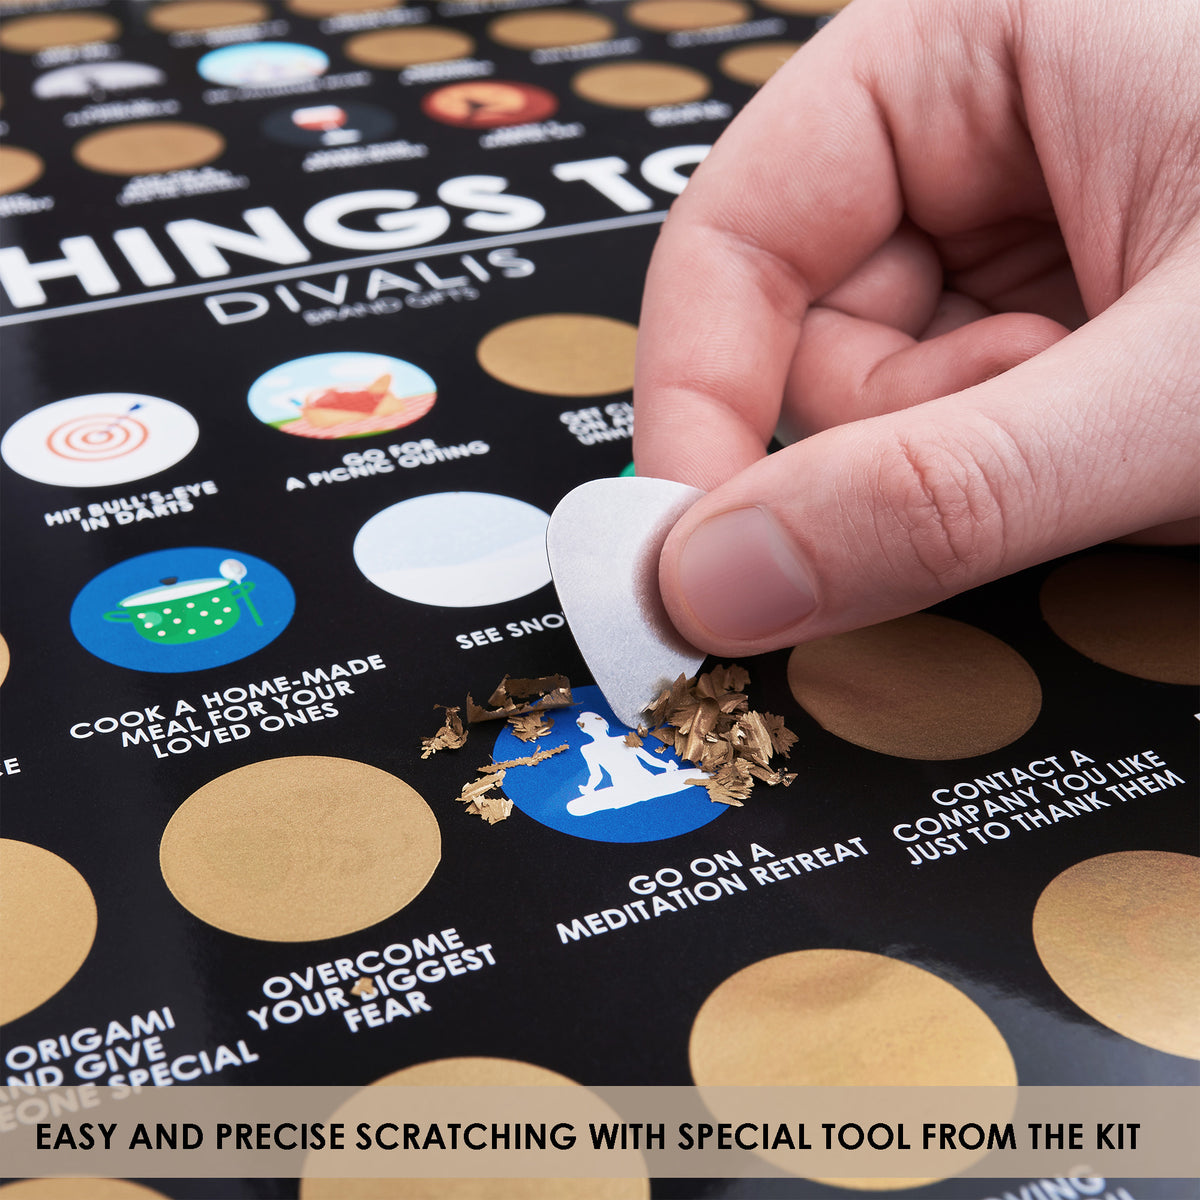 Discover New Things To Do and See With These Fun Scratch-Off Posters